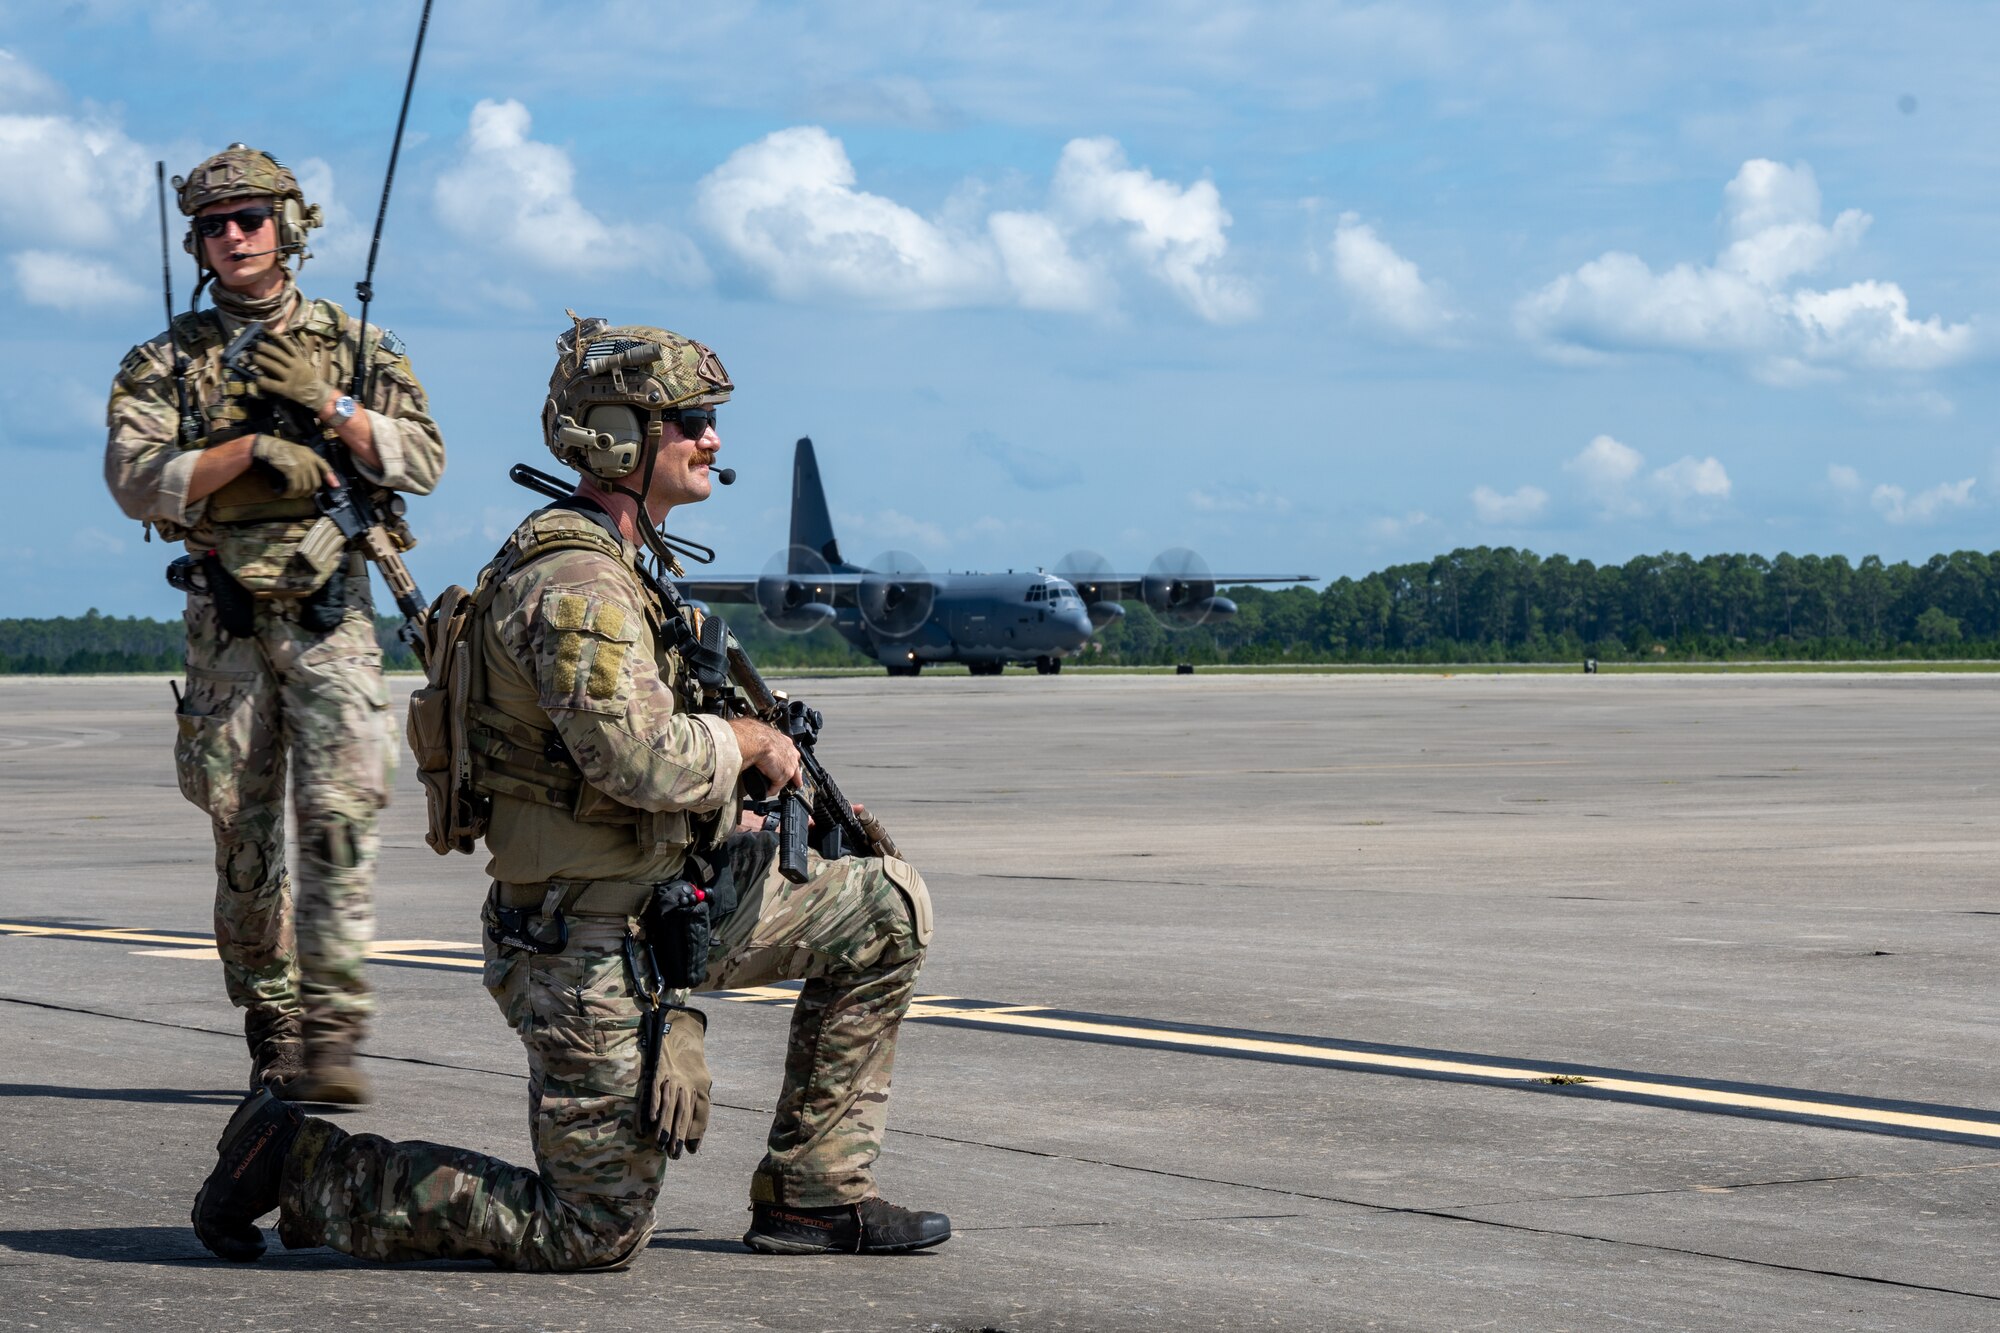 Air Commandos assigned to the 21st Special Tactics Squadron participate in an airfield establishment exercise at Hurlburt Field, Florida, Sept. 21, 2023. Members of the 21st STS jumped from an MC-130J to conduct the airfield establishment exercise during the 94th Joint Civilian Orientation Conference at Hurlburt Field. (U.S. Air Force photo by Airman 1st Class Hussein Enaya)